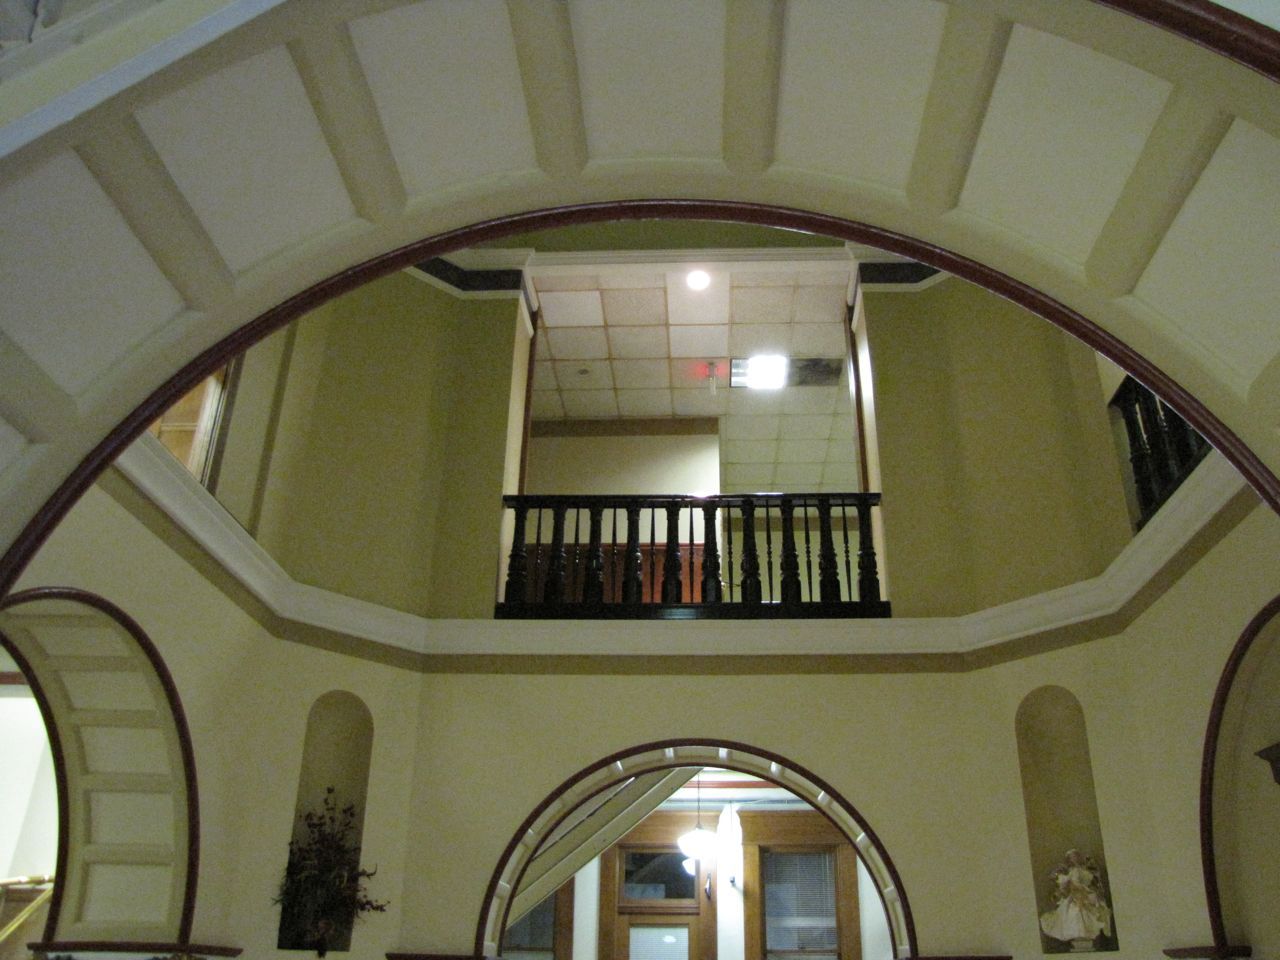 The arches and railings were part of the restoration process.